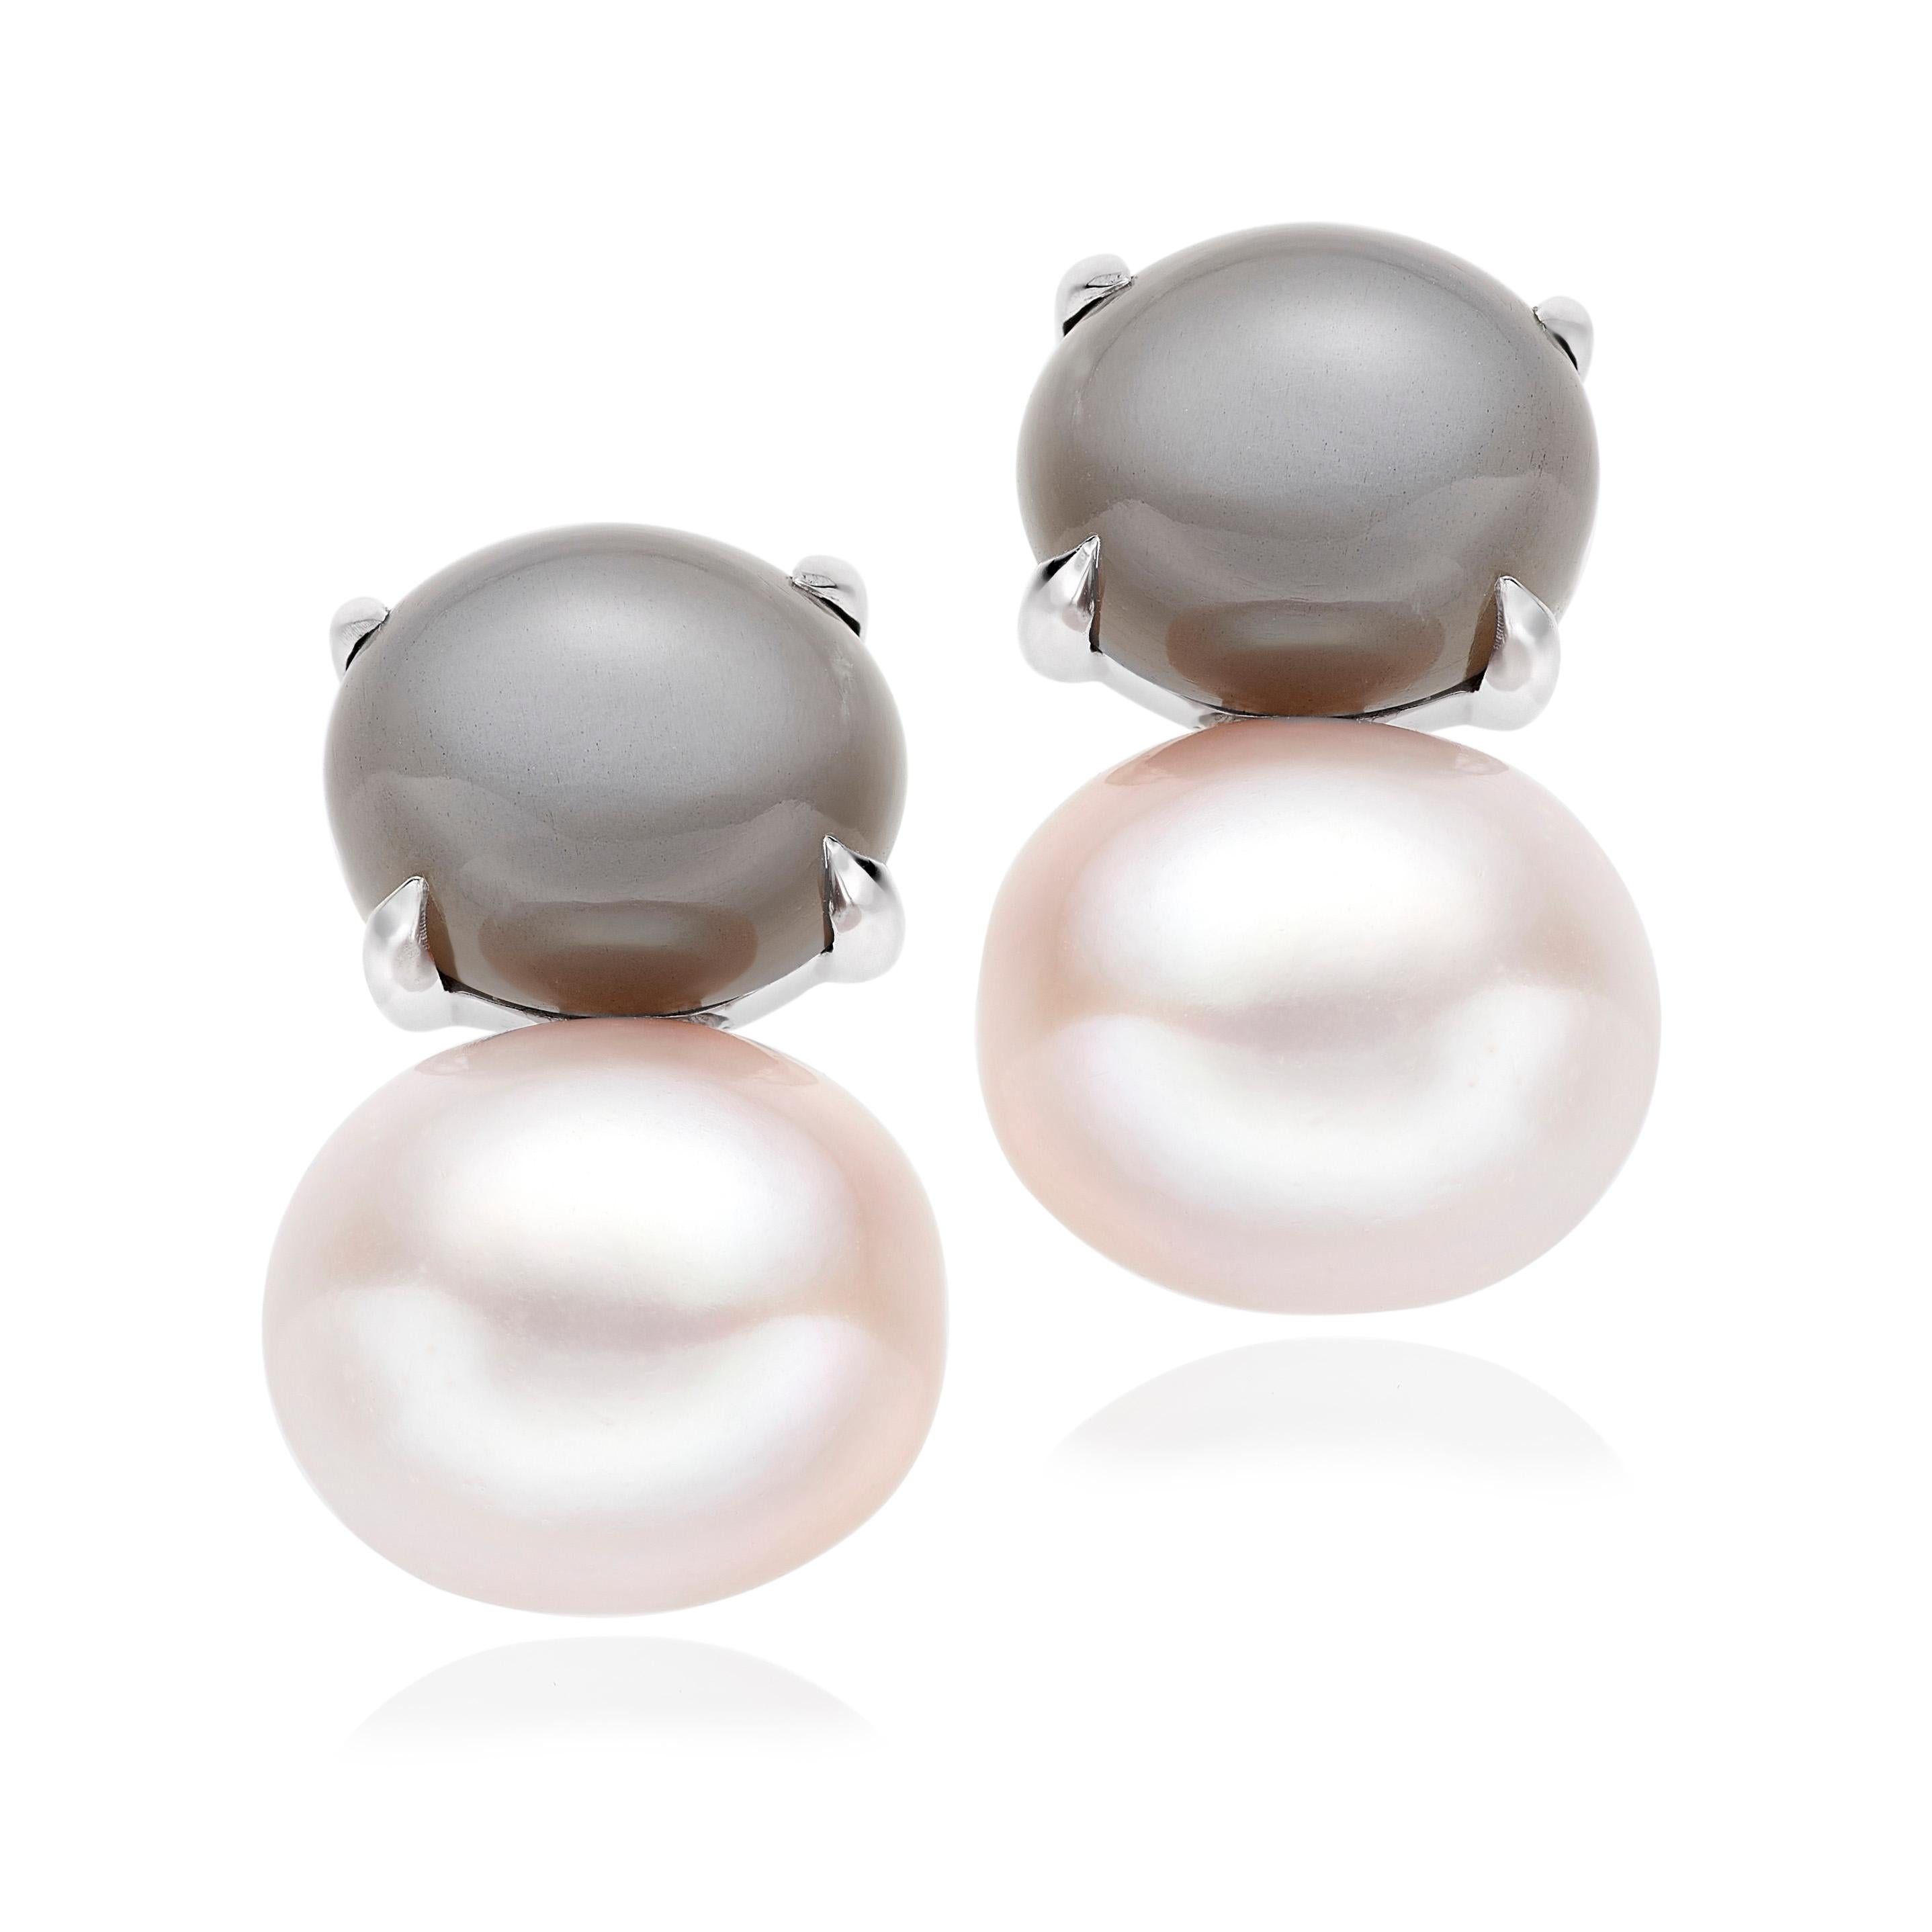 A pair of statement pearl earrings from Lilly Hastedt's
